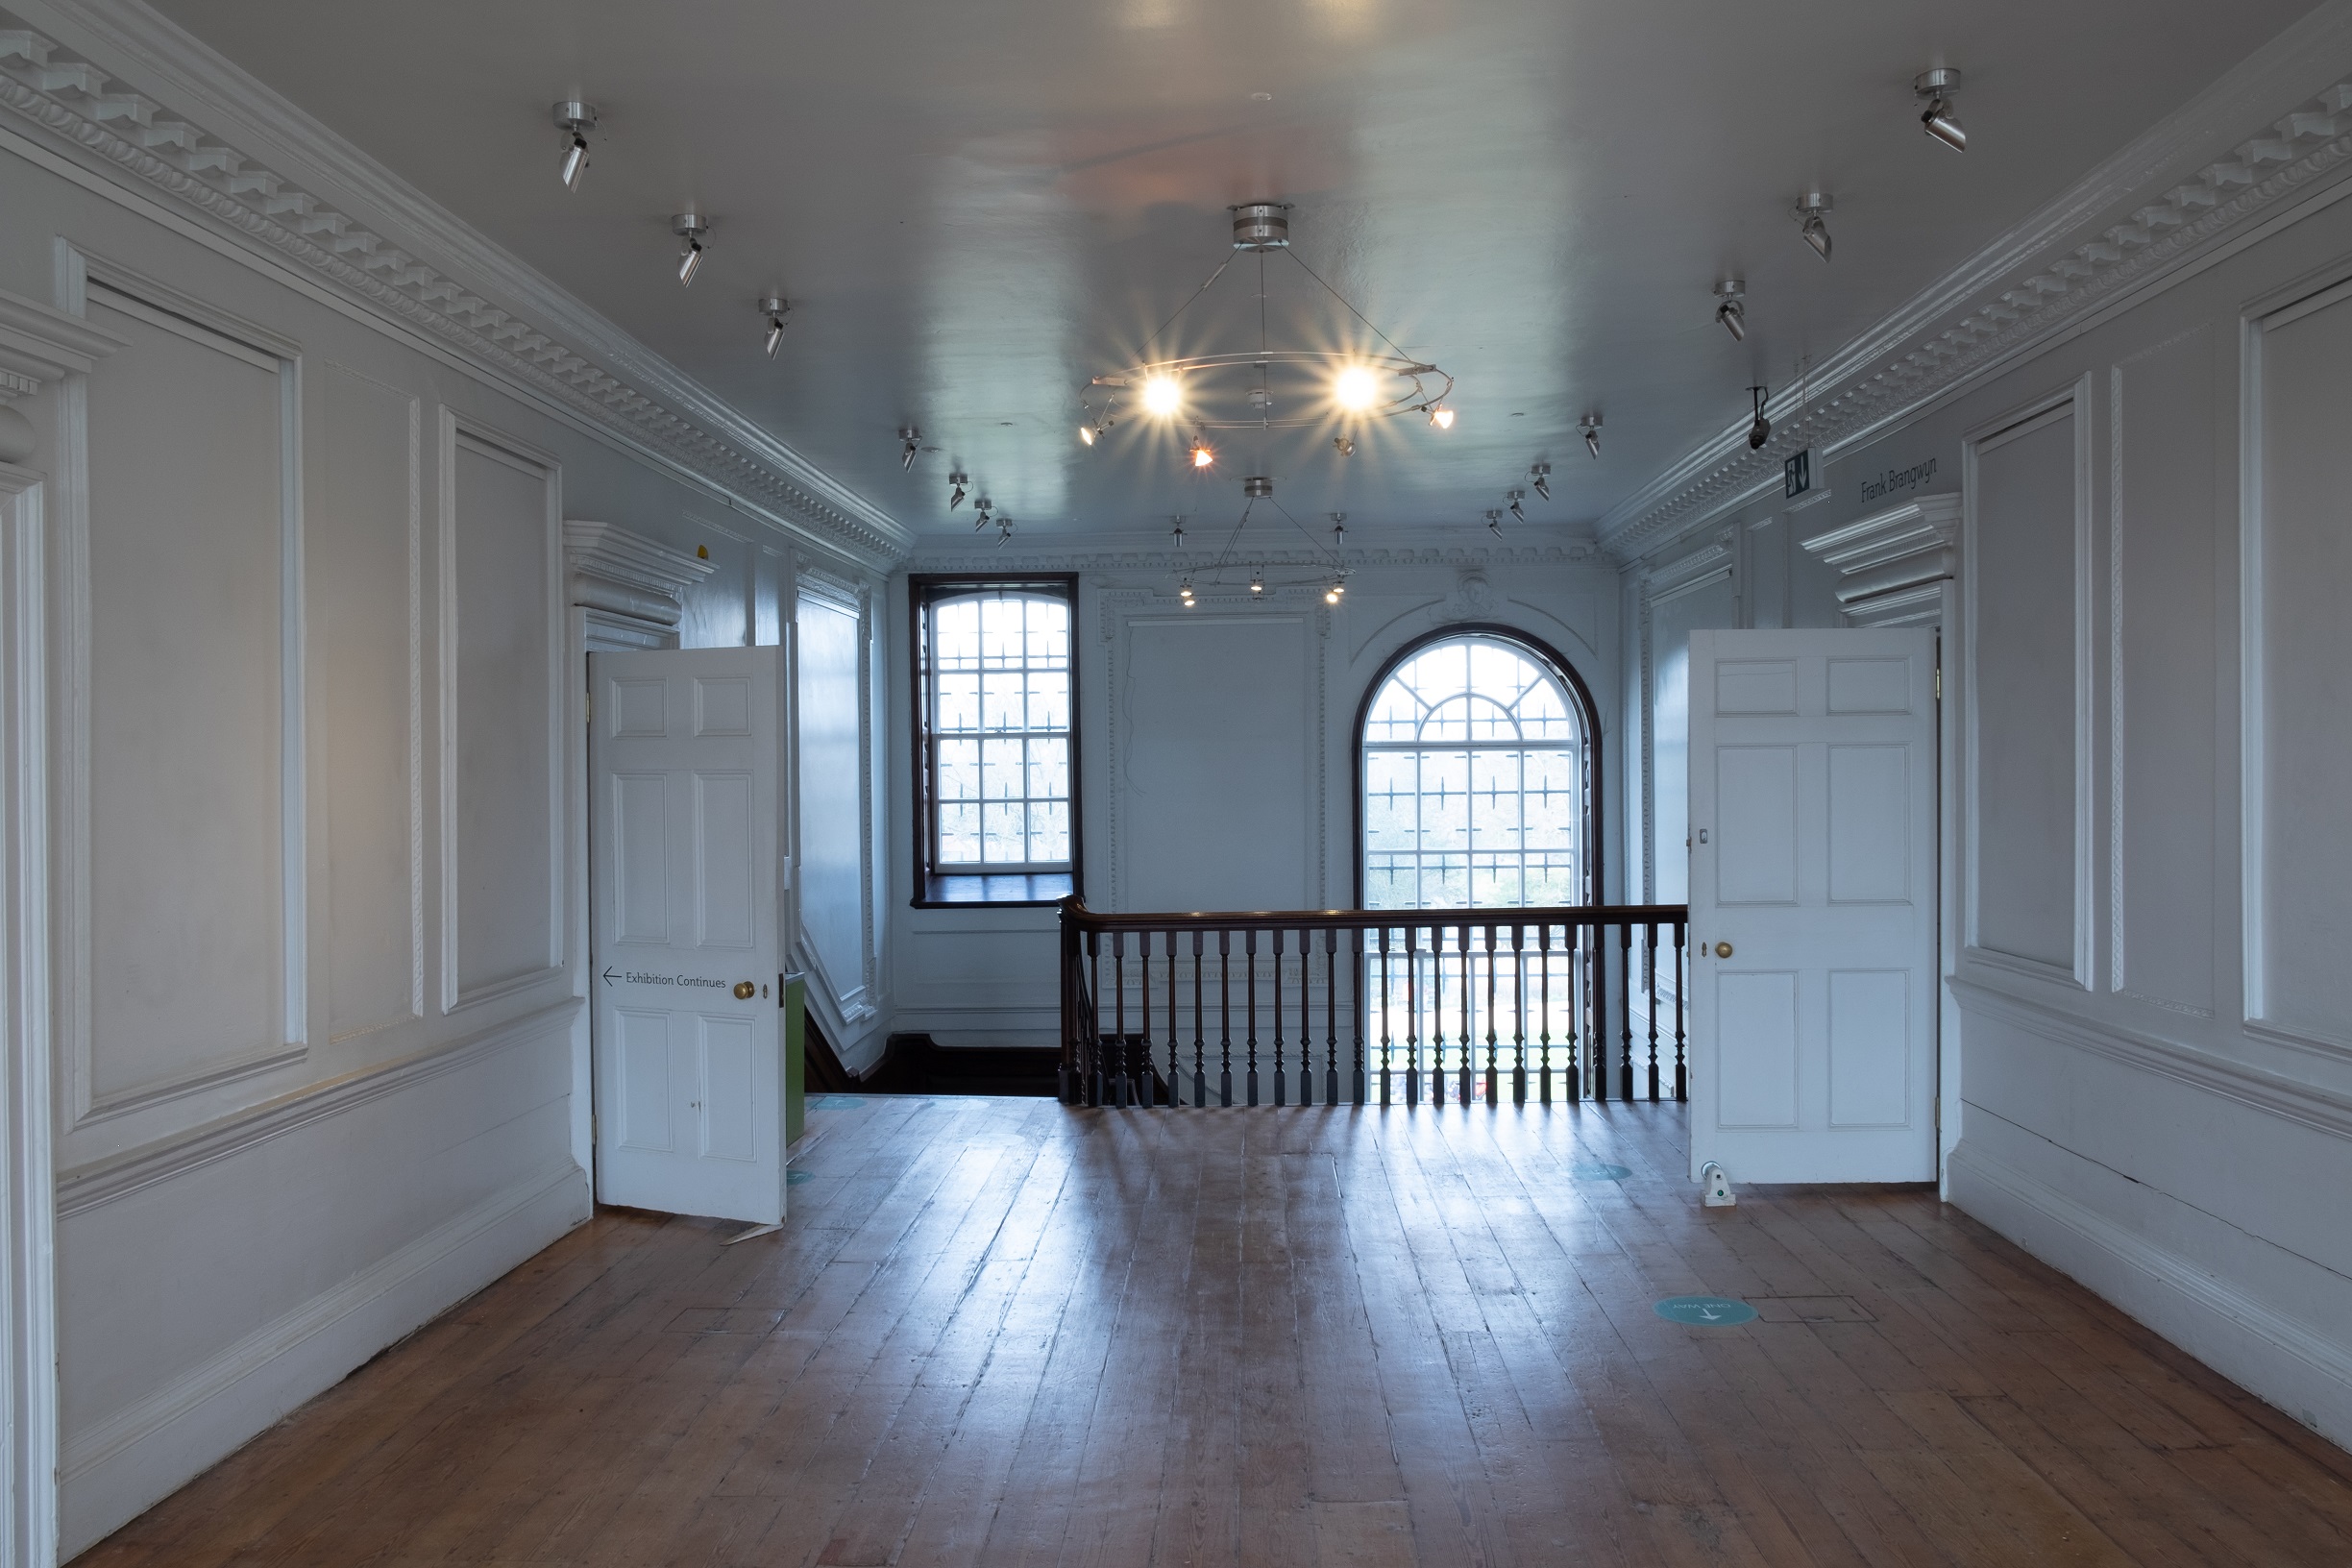 Upstairs landing space or Story Lounge at William Morris Gallery. Panelled white walls with wood floors.